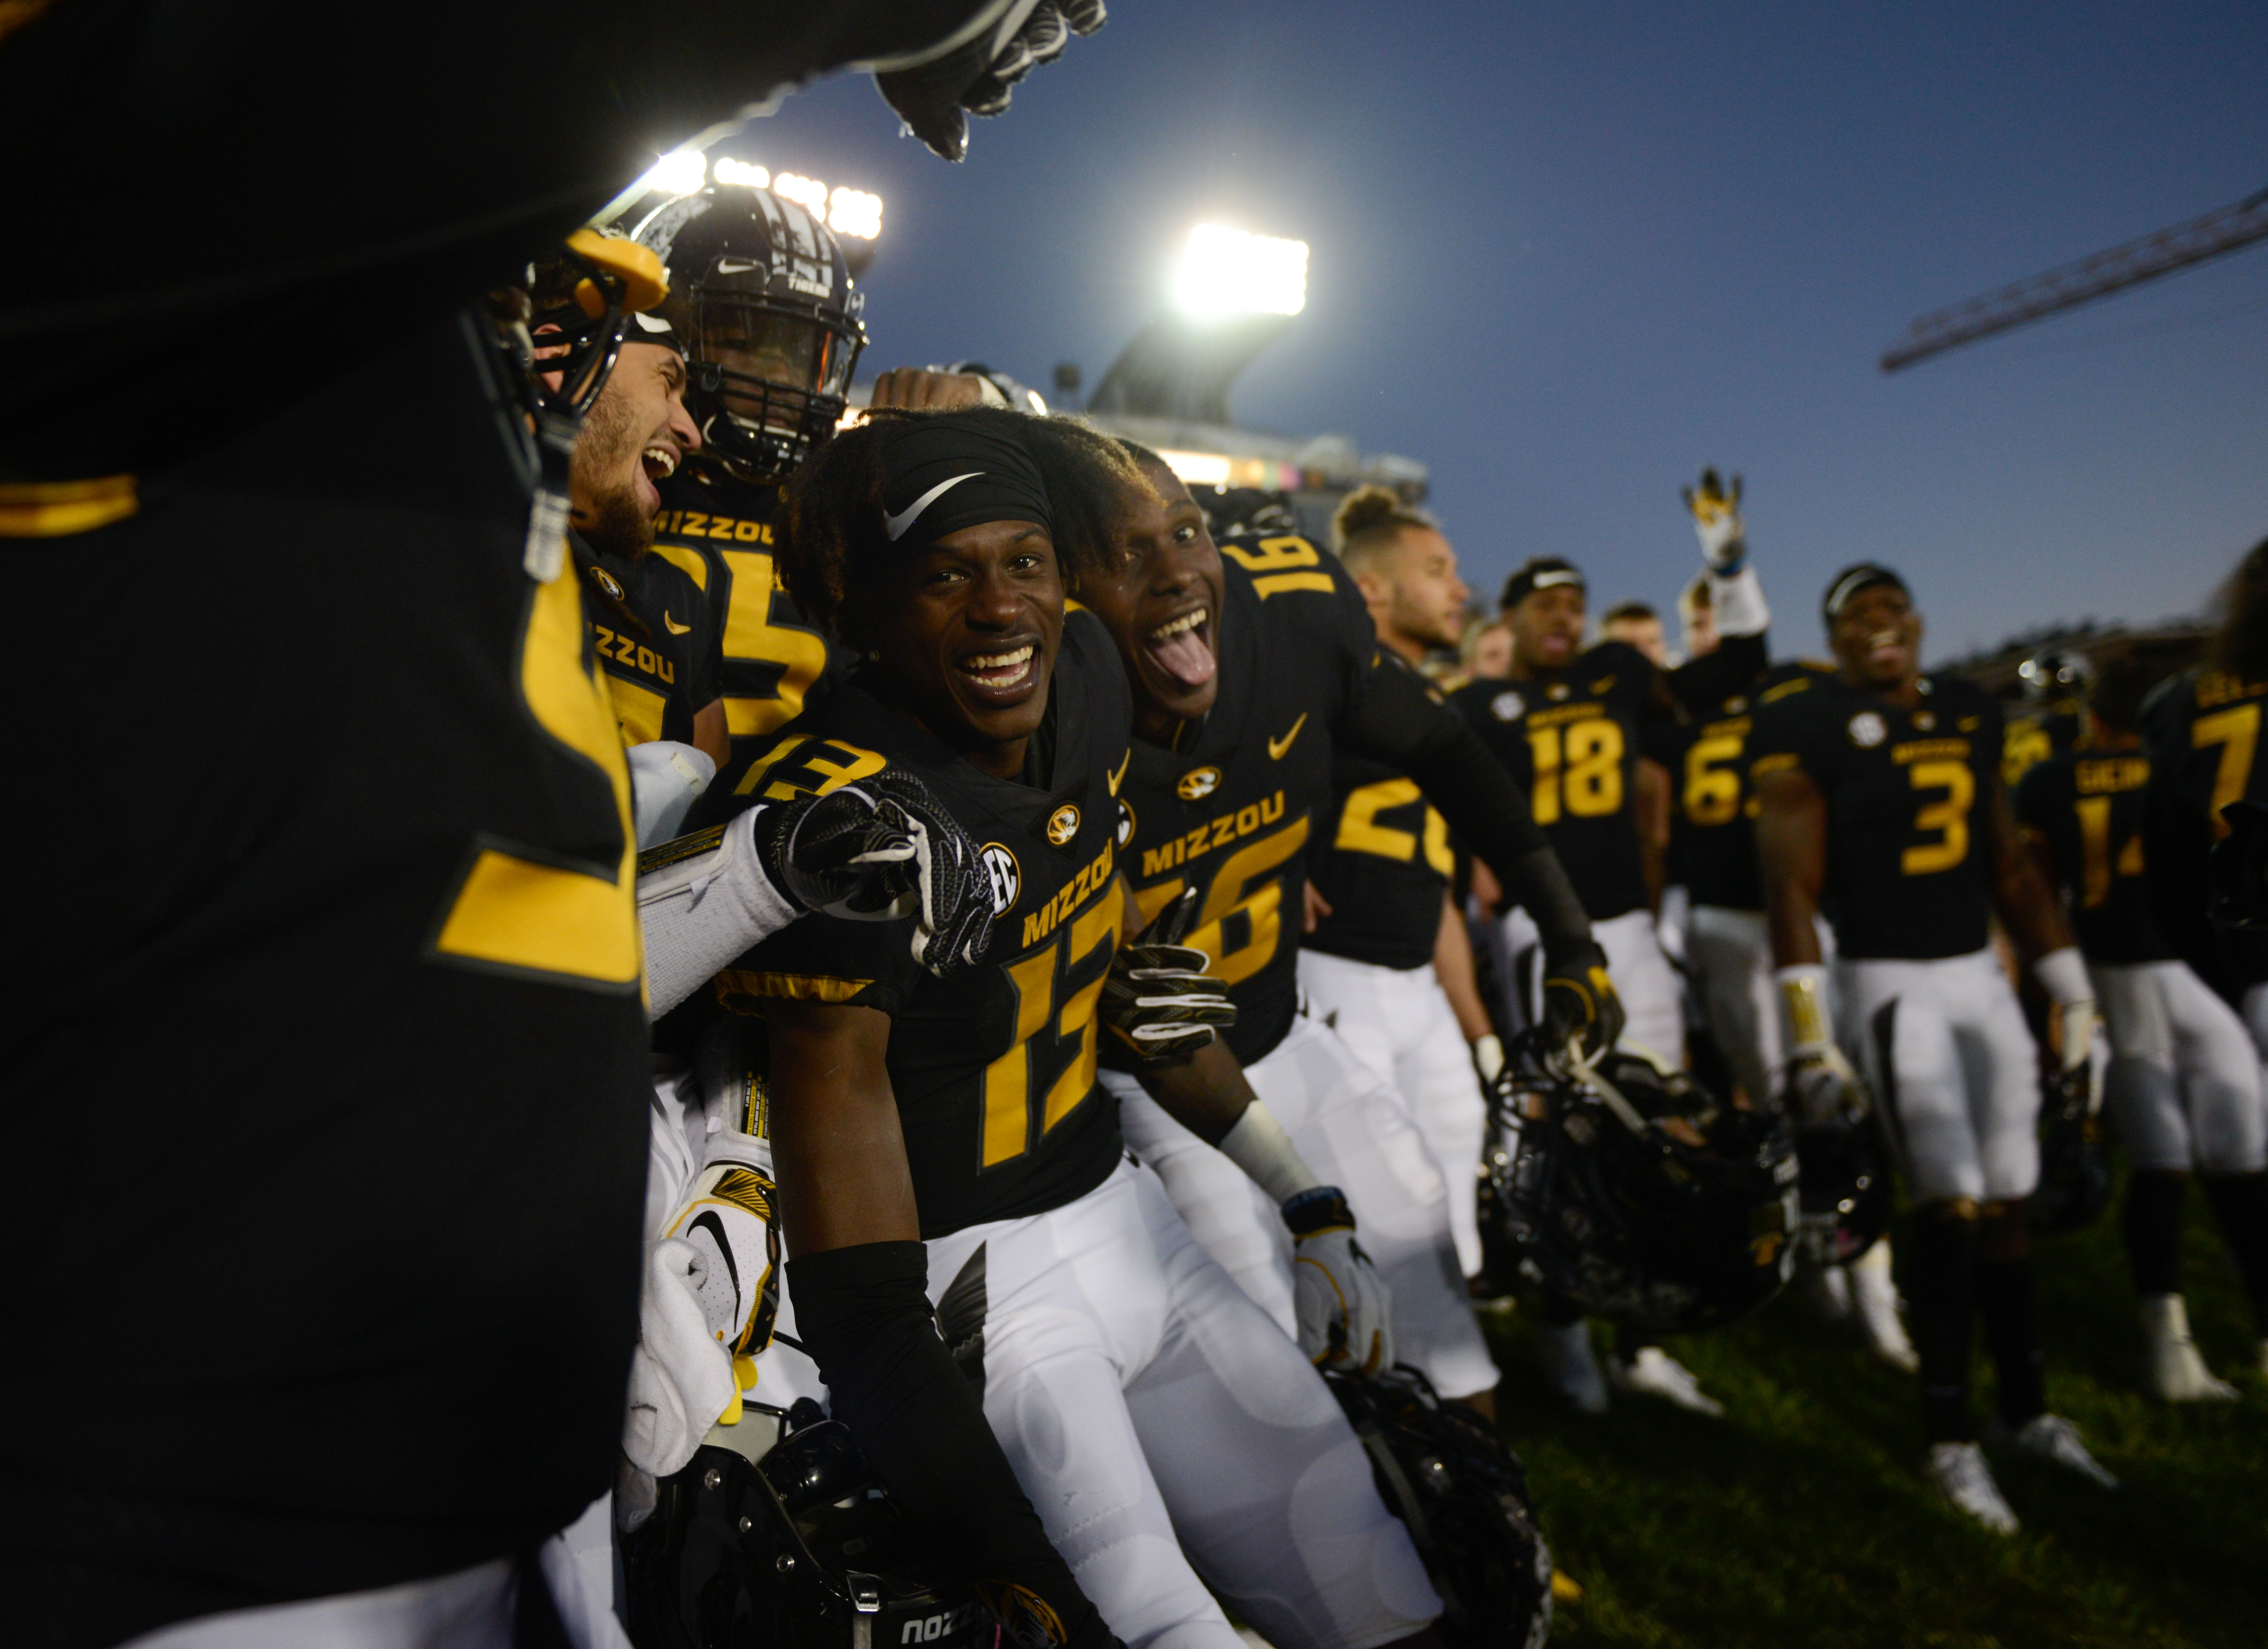 Mizzou football players stand together in celebration after a win.